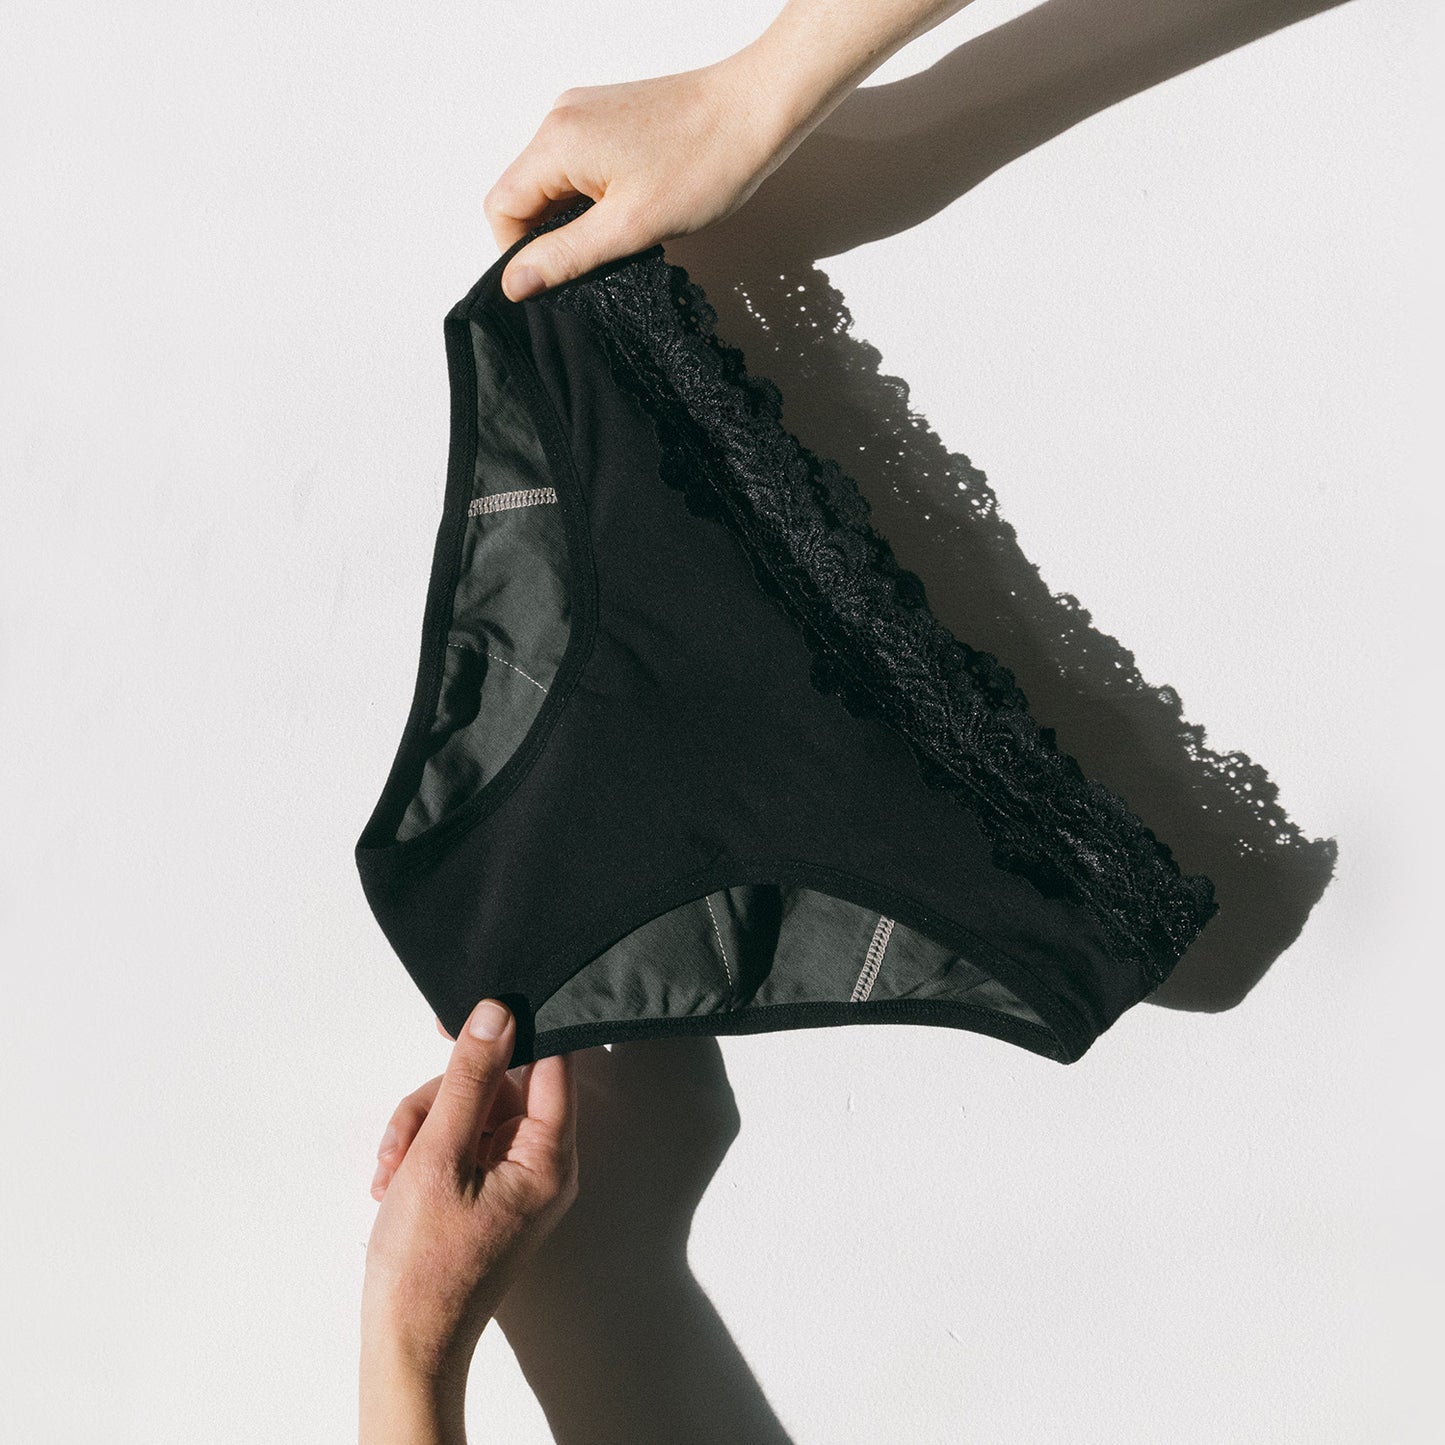 Sustainable and Ethical Reemi Period Underwear 